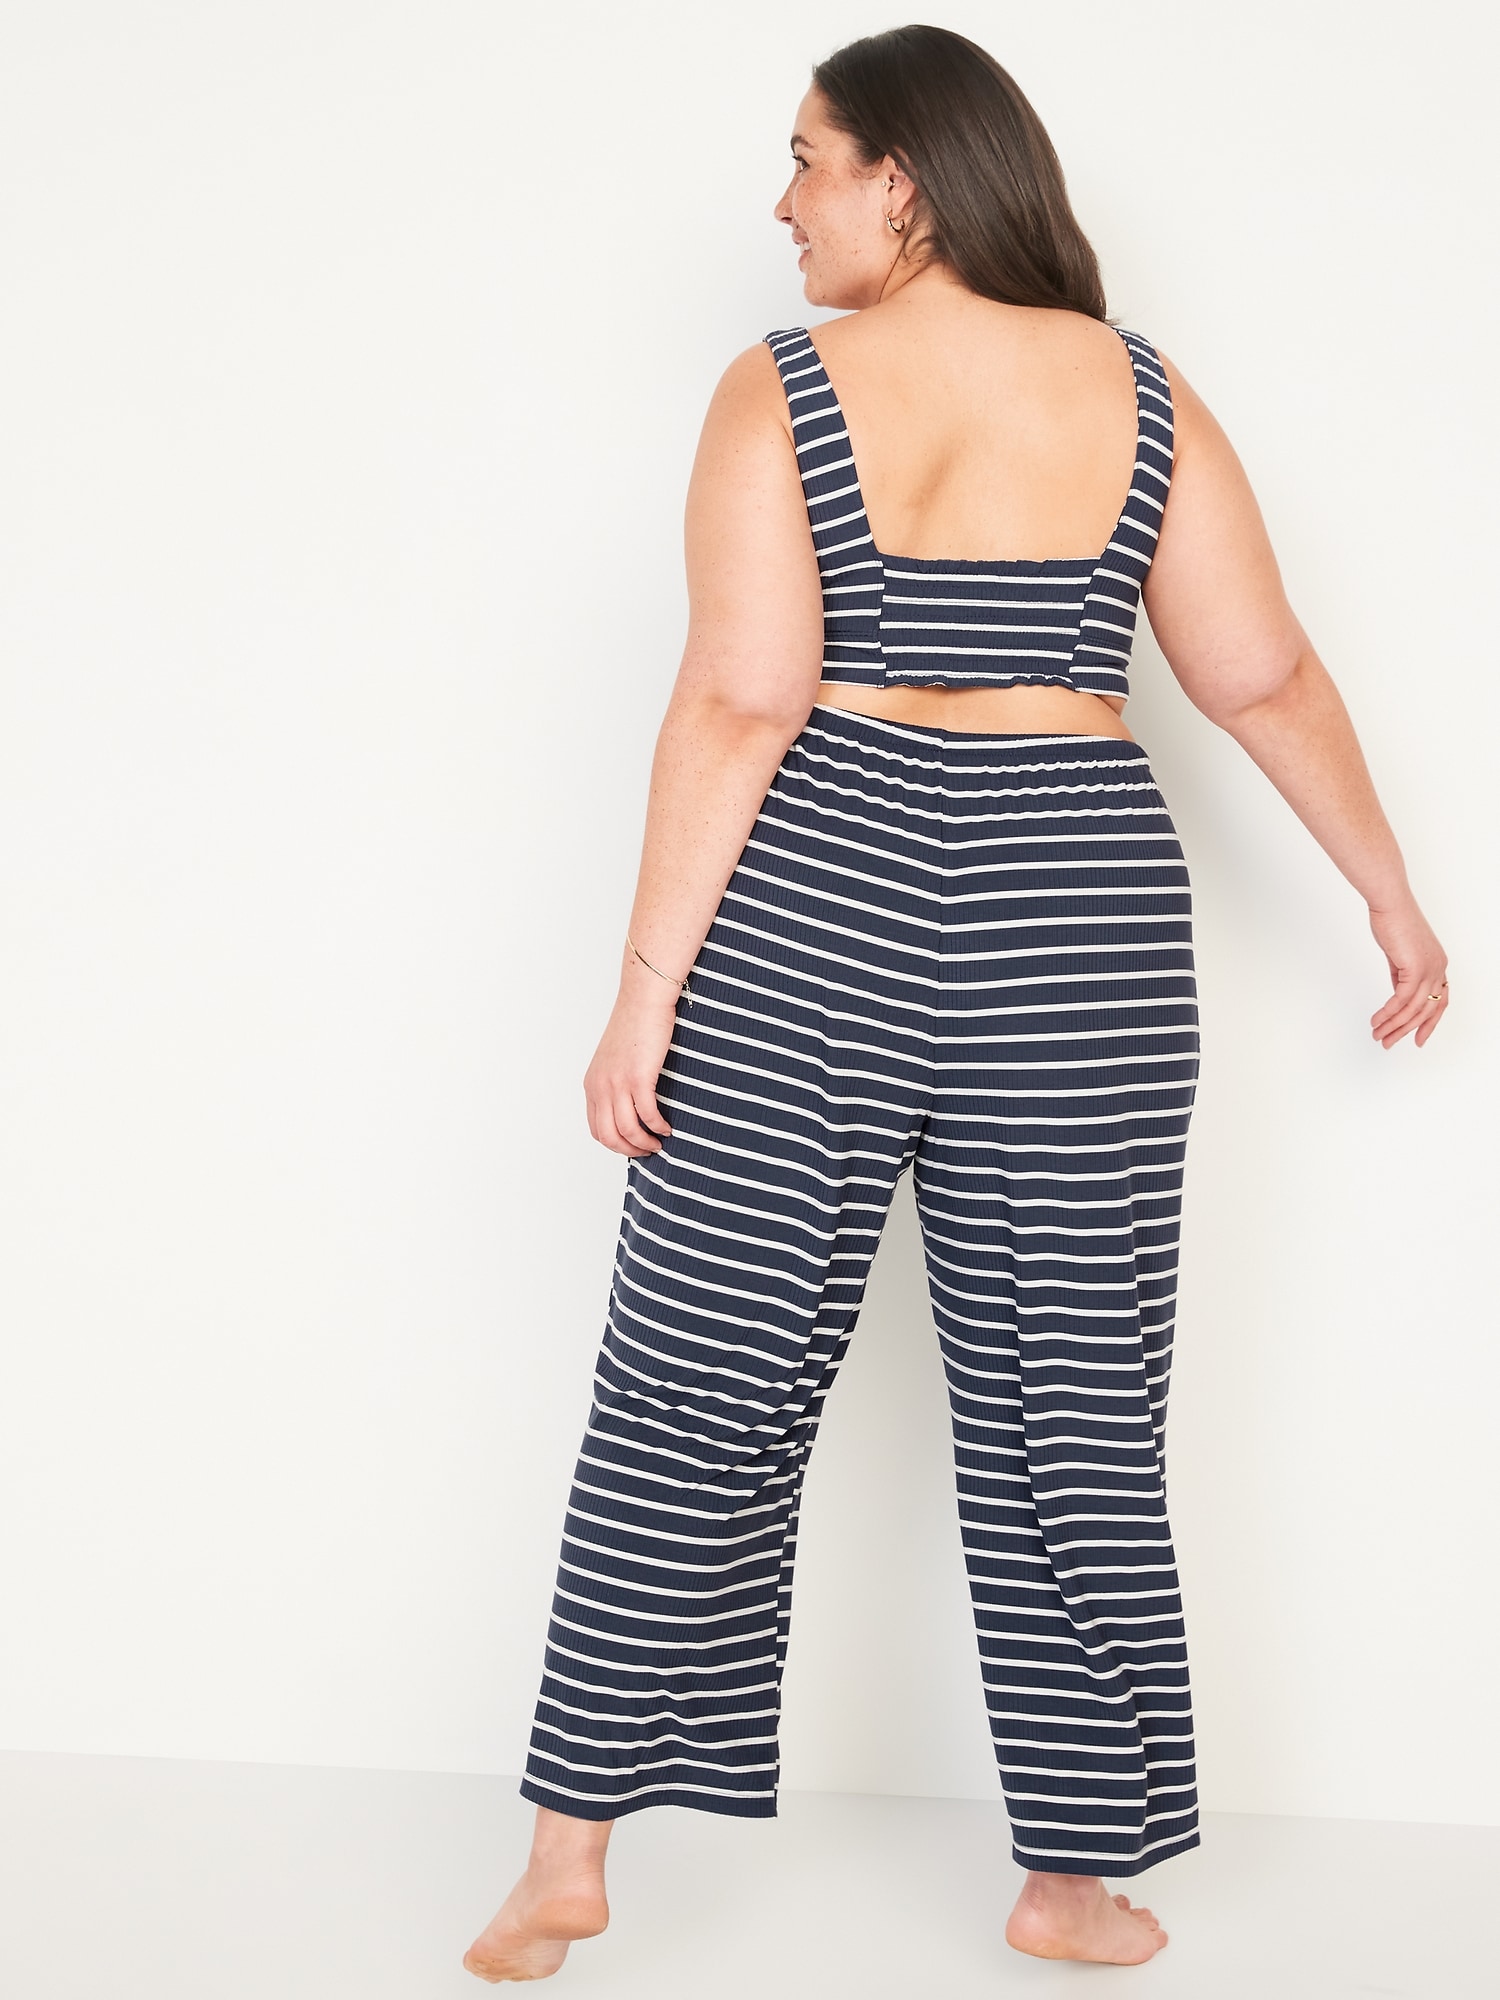 Old Navy, Pants & Jumpsuits, Womens Size Medium Old Navy Striped Leggings